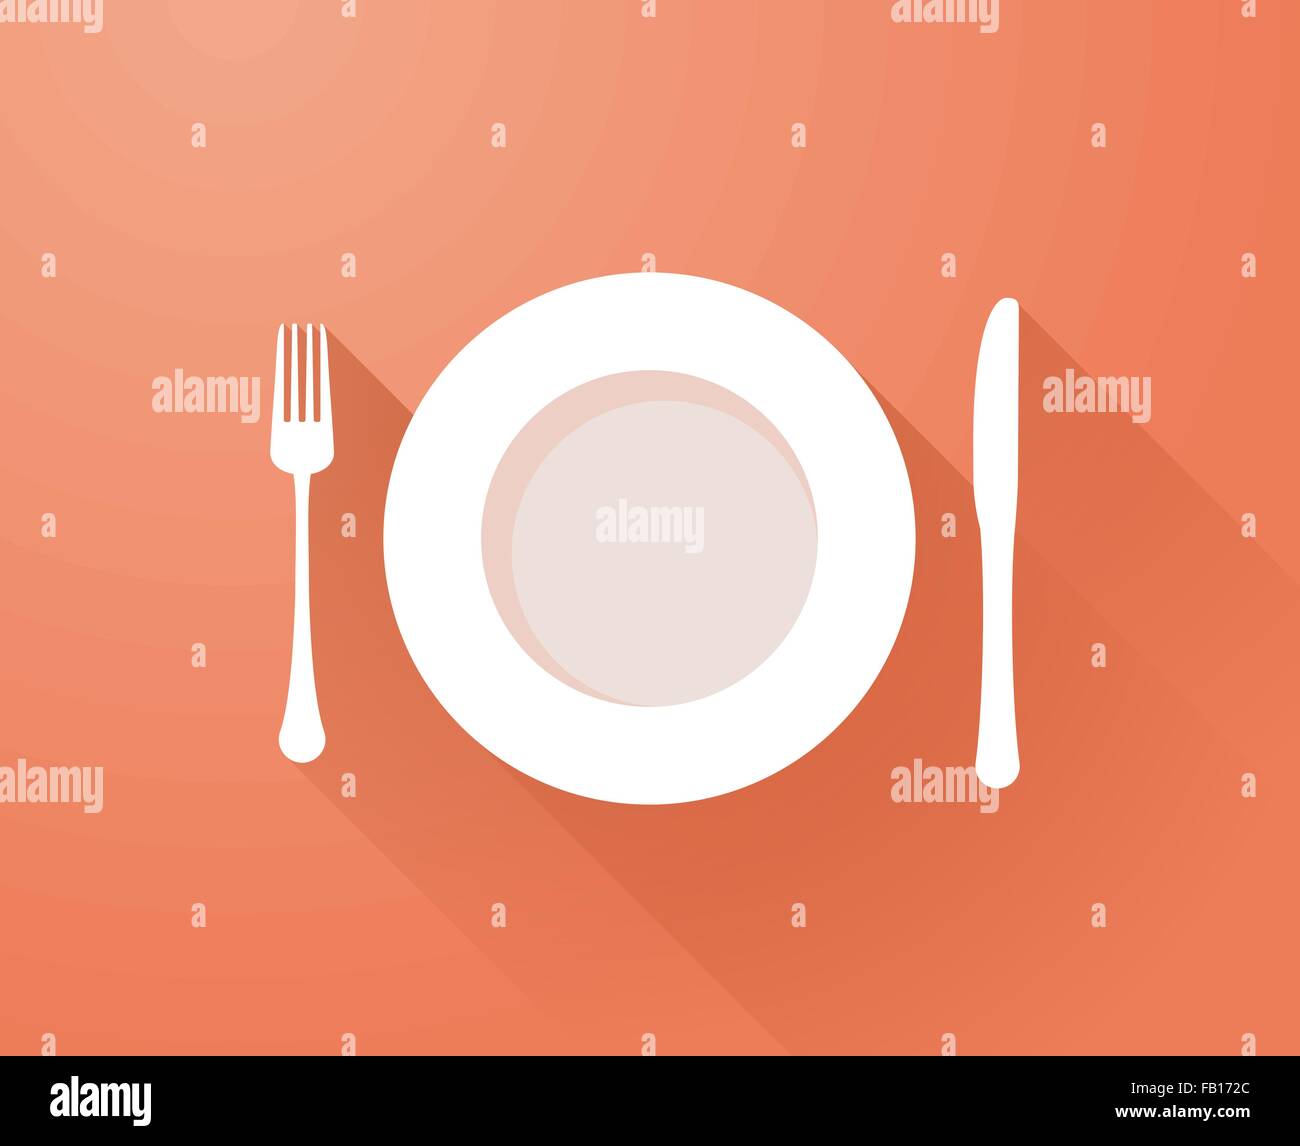 Plate with cutlery and long shadows Stock Vector